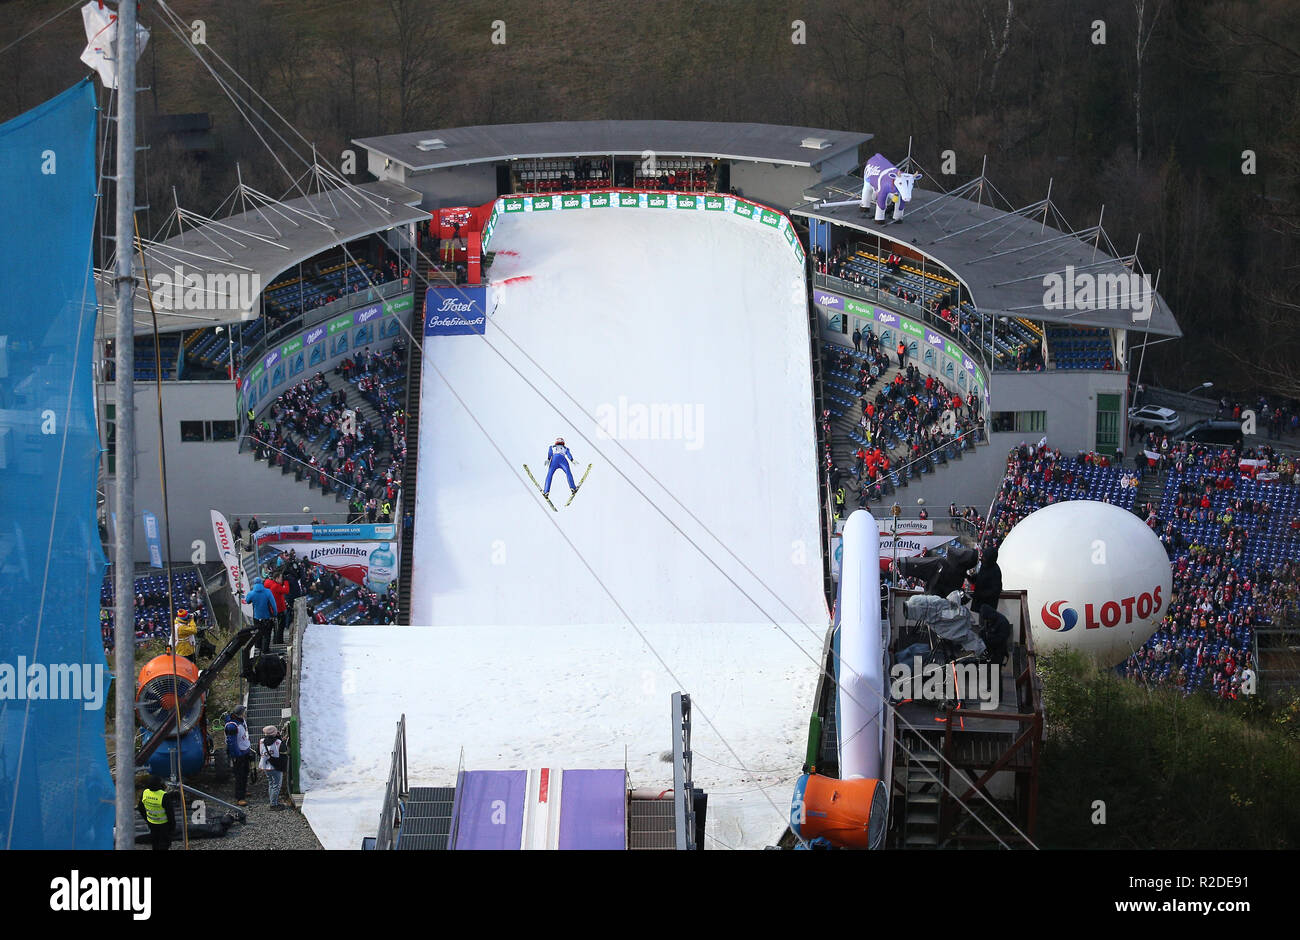 Fans  World Cup FIS Ski Jumping on November 17, 2018 in Wisla, Poland. Stock Photo